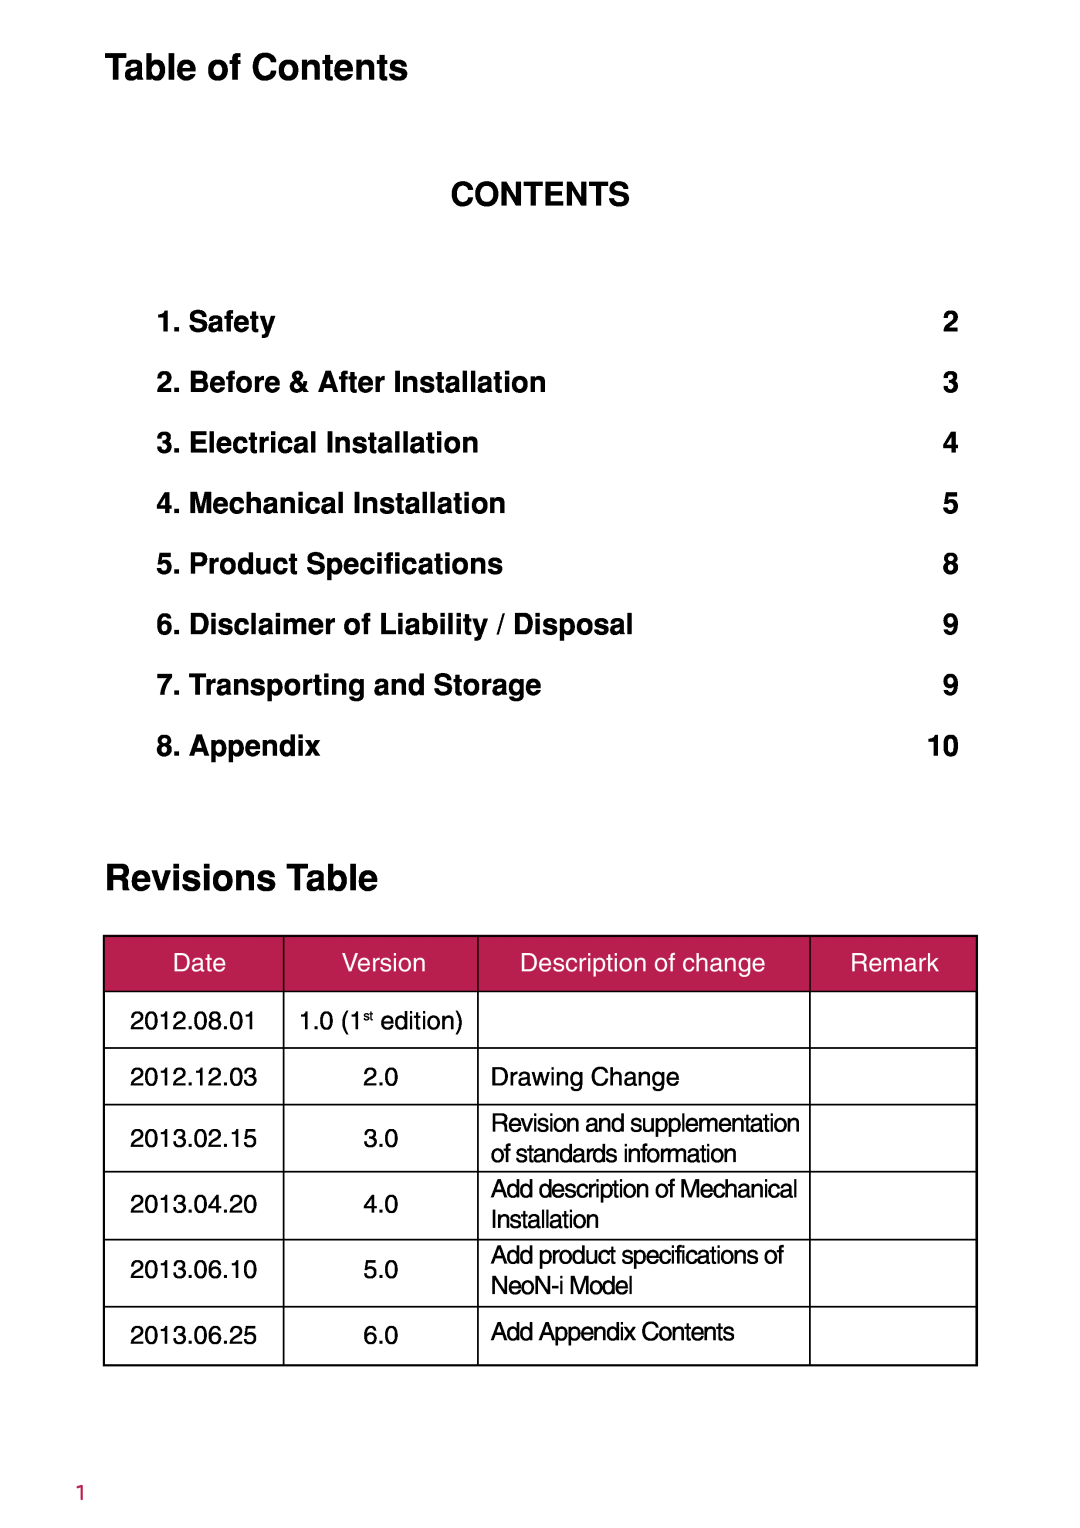 LG Electronics LGXXXN1C(W)-G3 Table of Contents, Revisions Table, Safety, Before & After Installation, Appendix, Date 